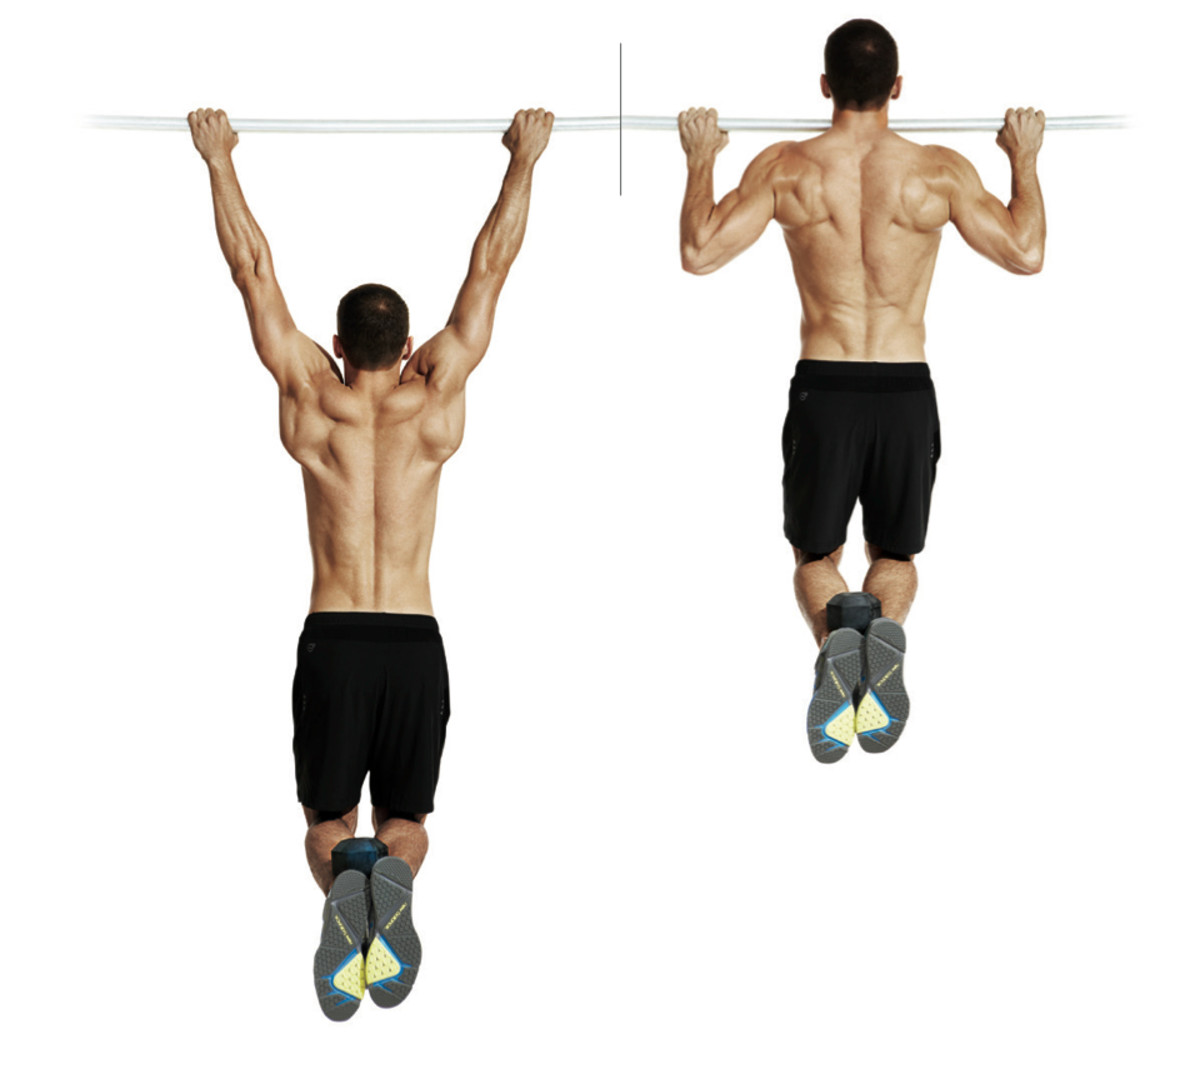 15 Top Back Exercises for Growth (+ How to Use Them)